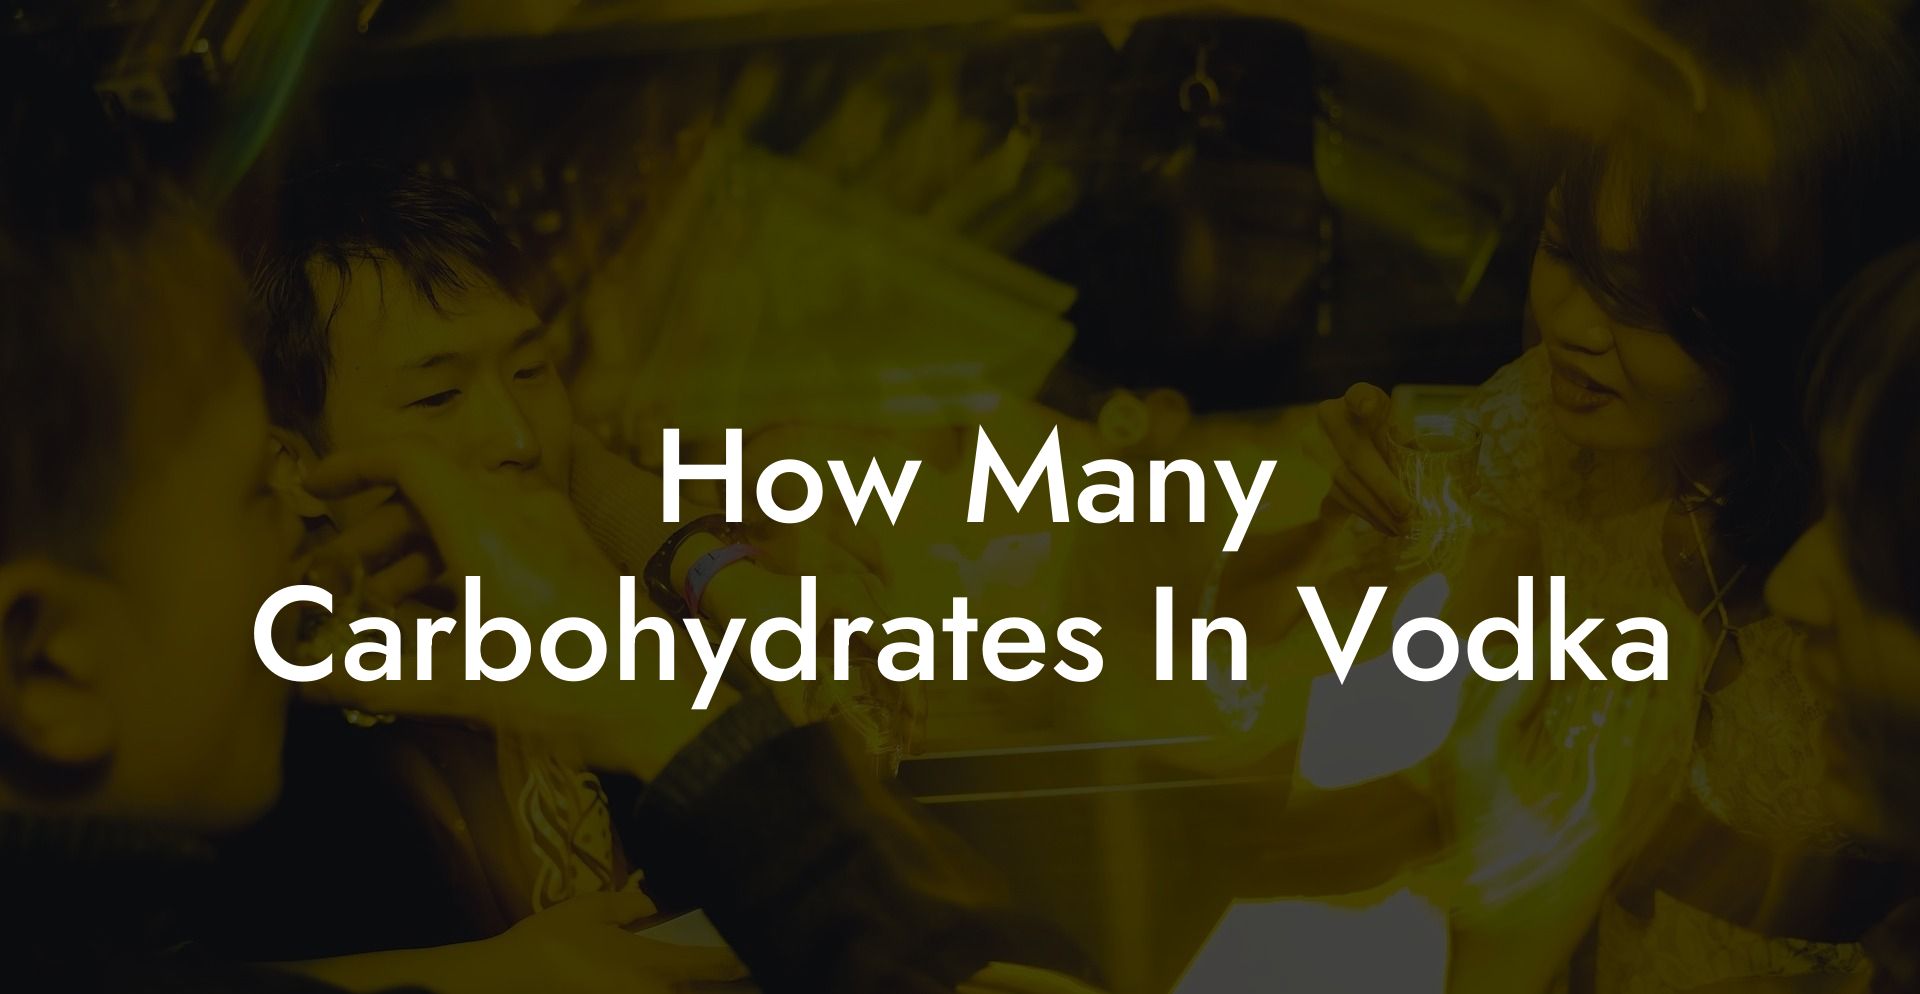 How Many Carbohydrates In Vodka